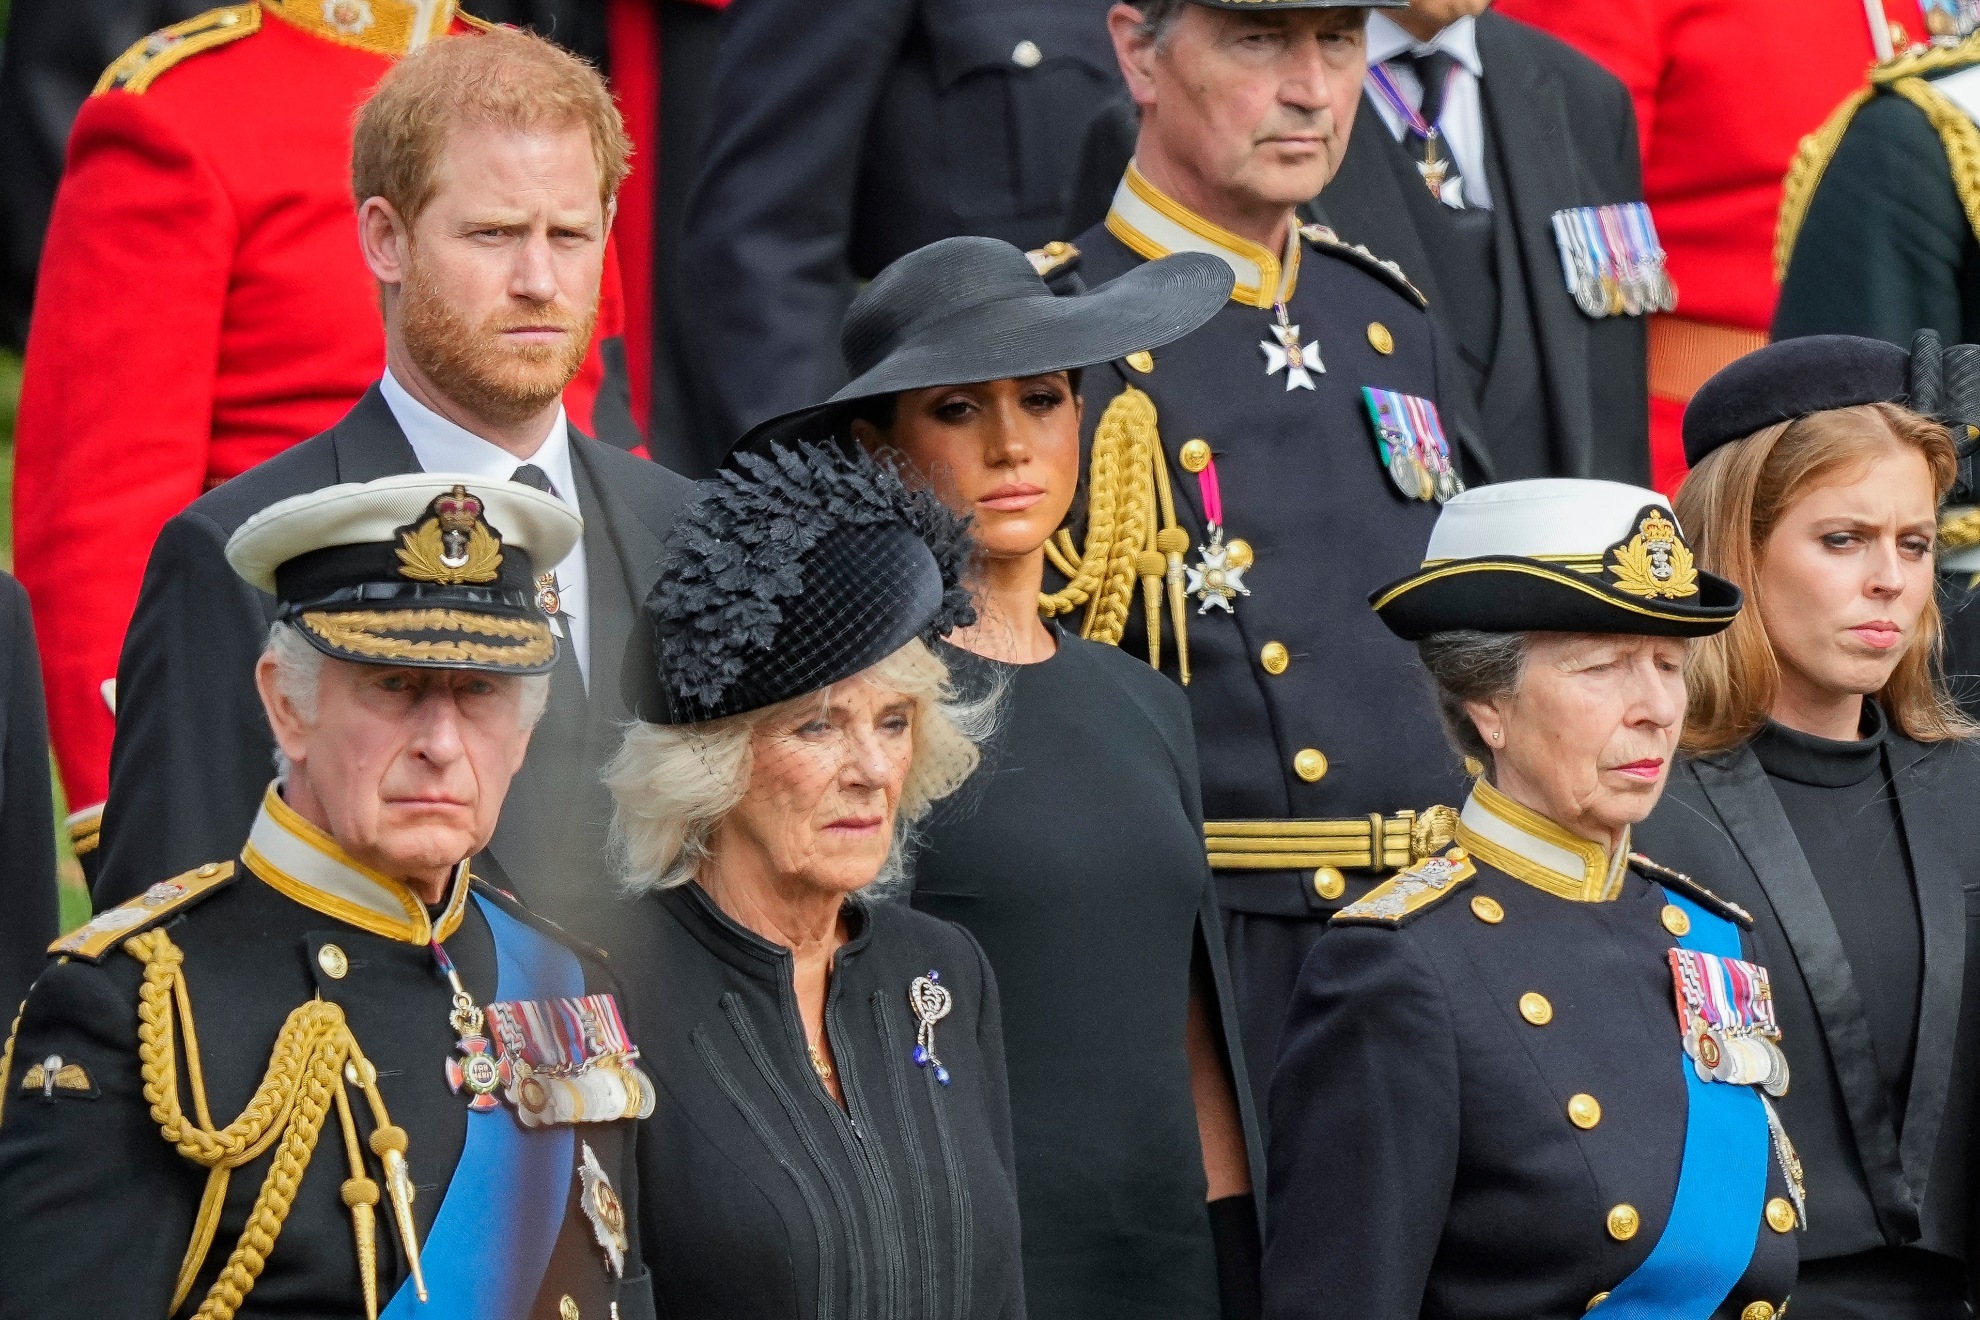 Image of the Royal Family